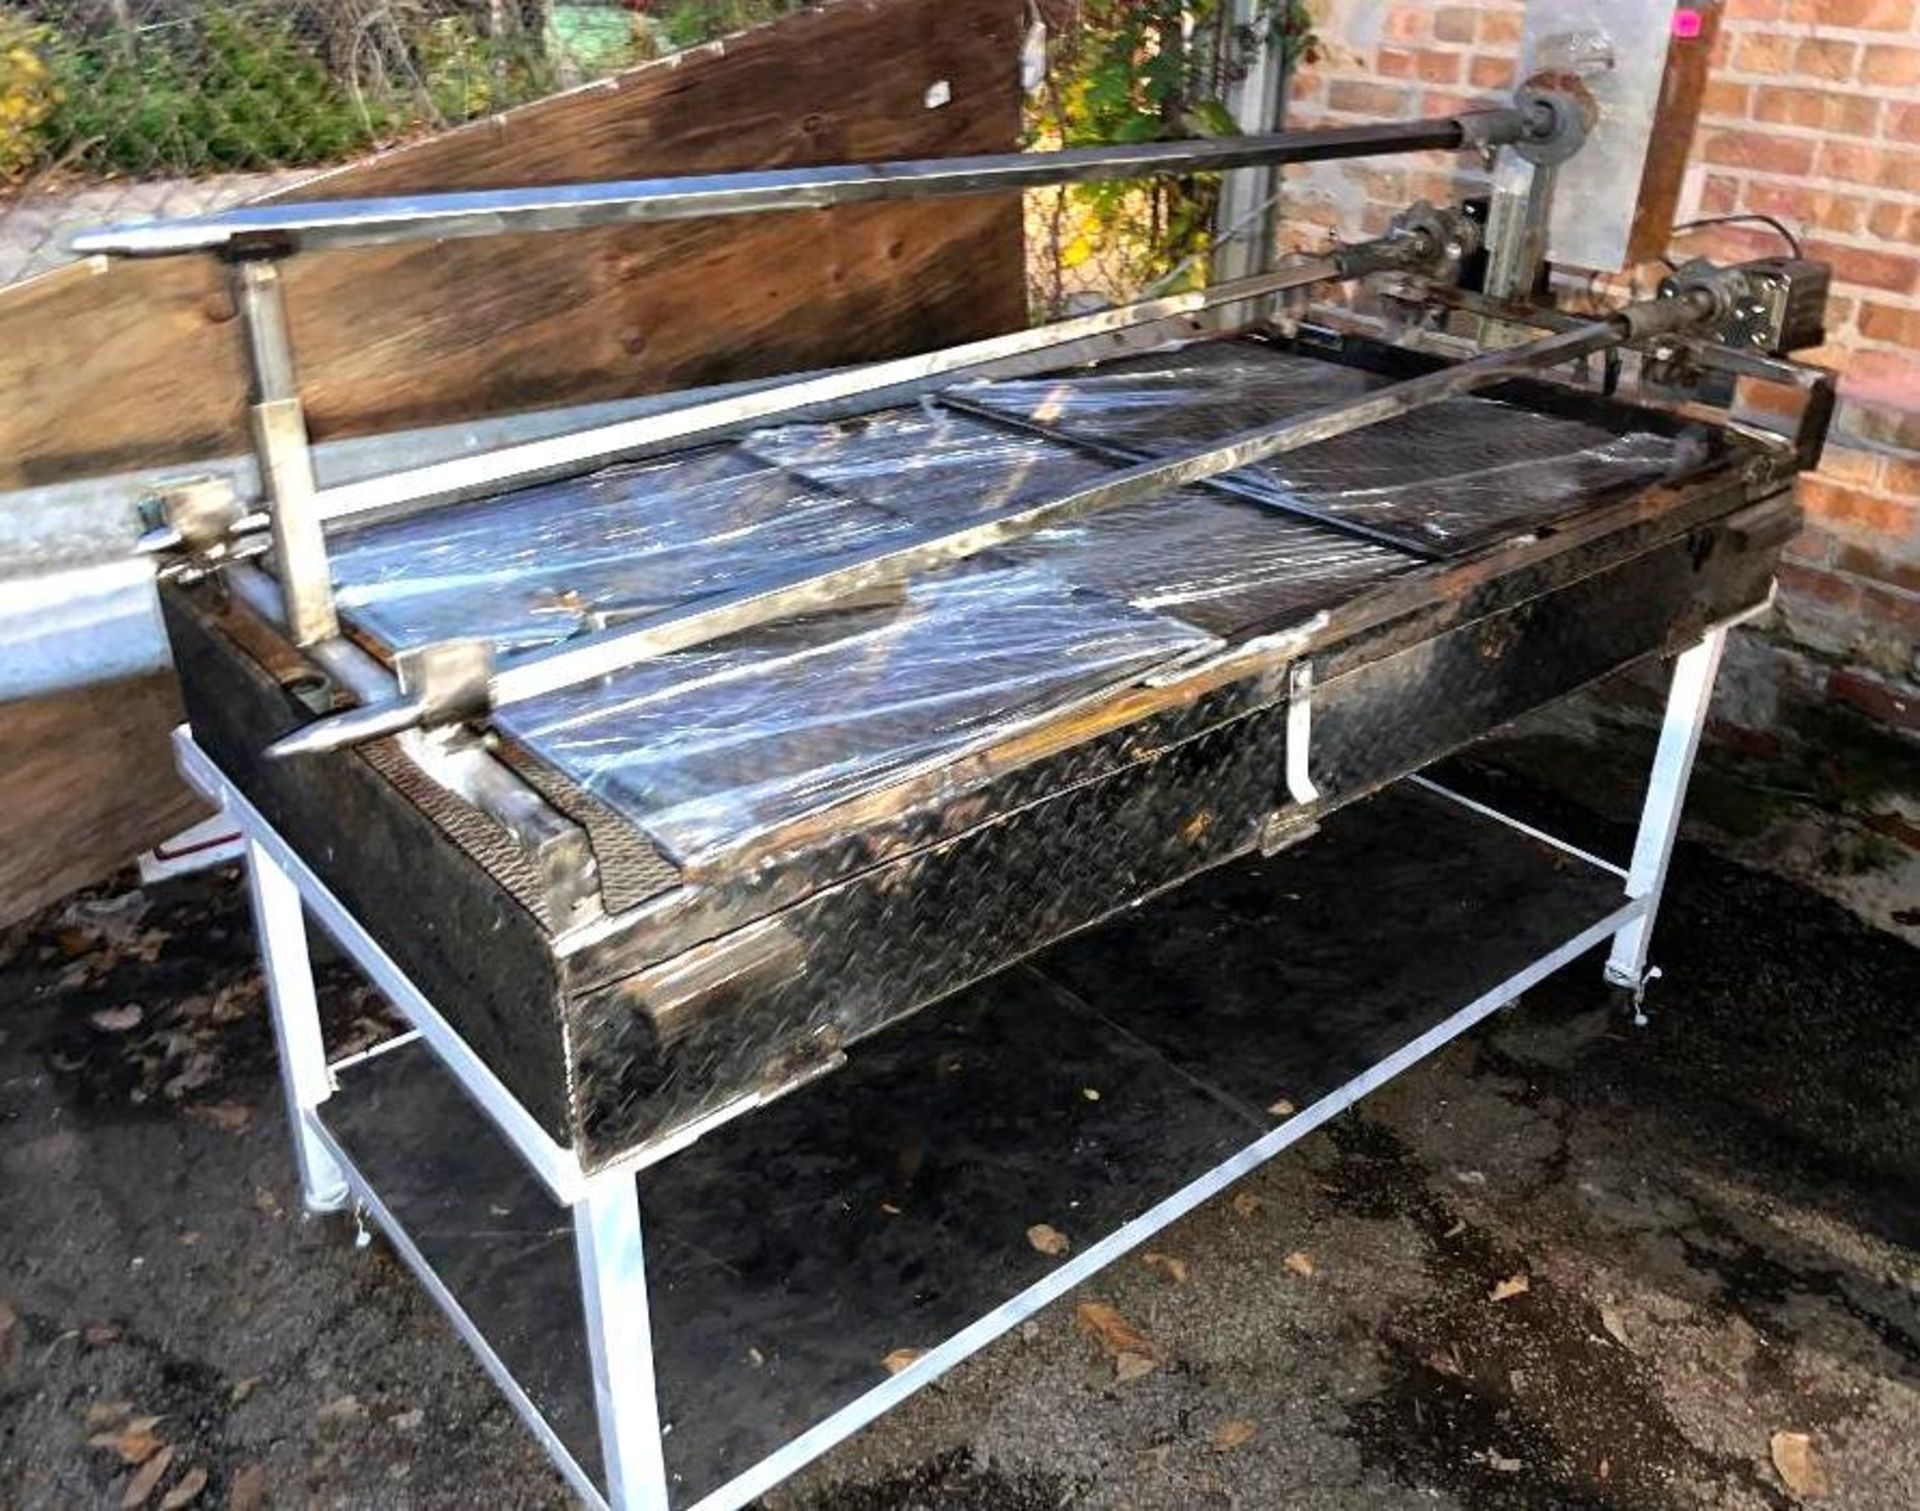 DESCRIPTION: 60" CHARCOAL BBQ GRILL W/ THREE PRONG MOTORIZED ROTISSERIE LOCATION: OUTSIDE QTY: 1